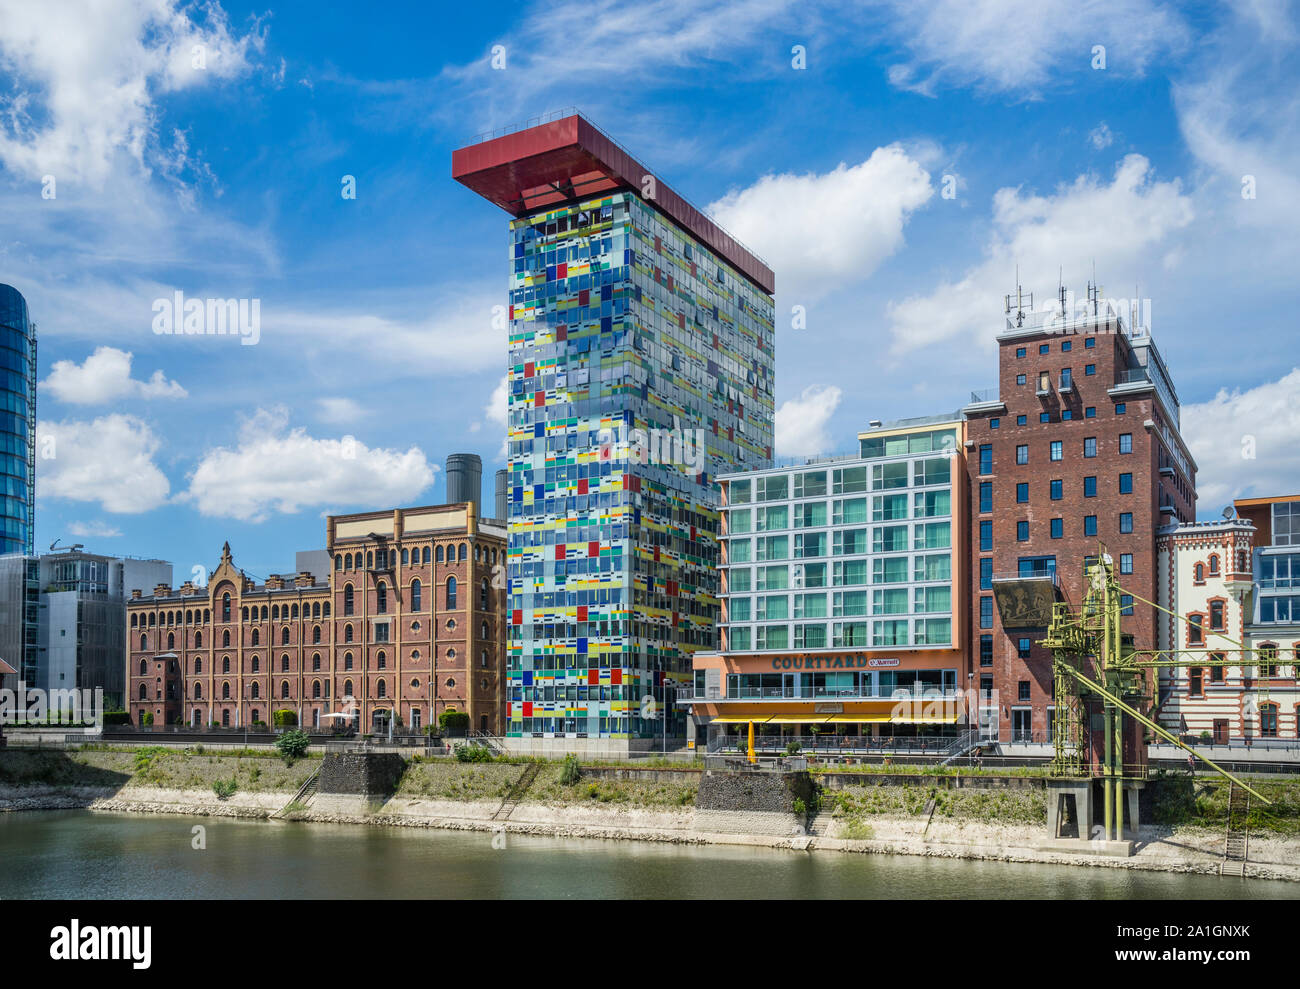 The colourful facade of the Colorium Building stands out amongst the former warehouses at the Media Harbour in the Port of Düsseldorf. With 17 types o Stock Photo